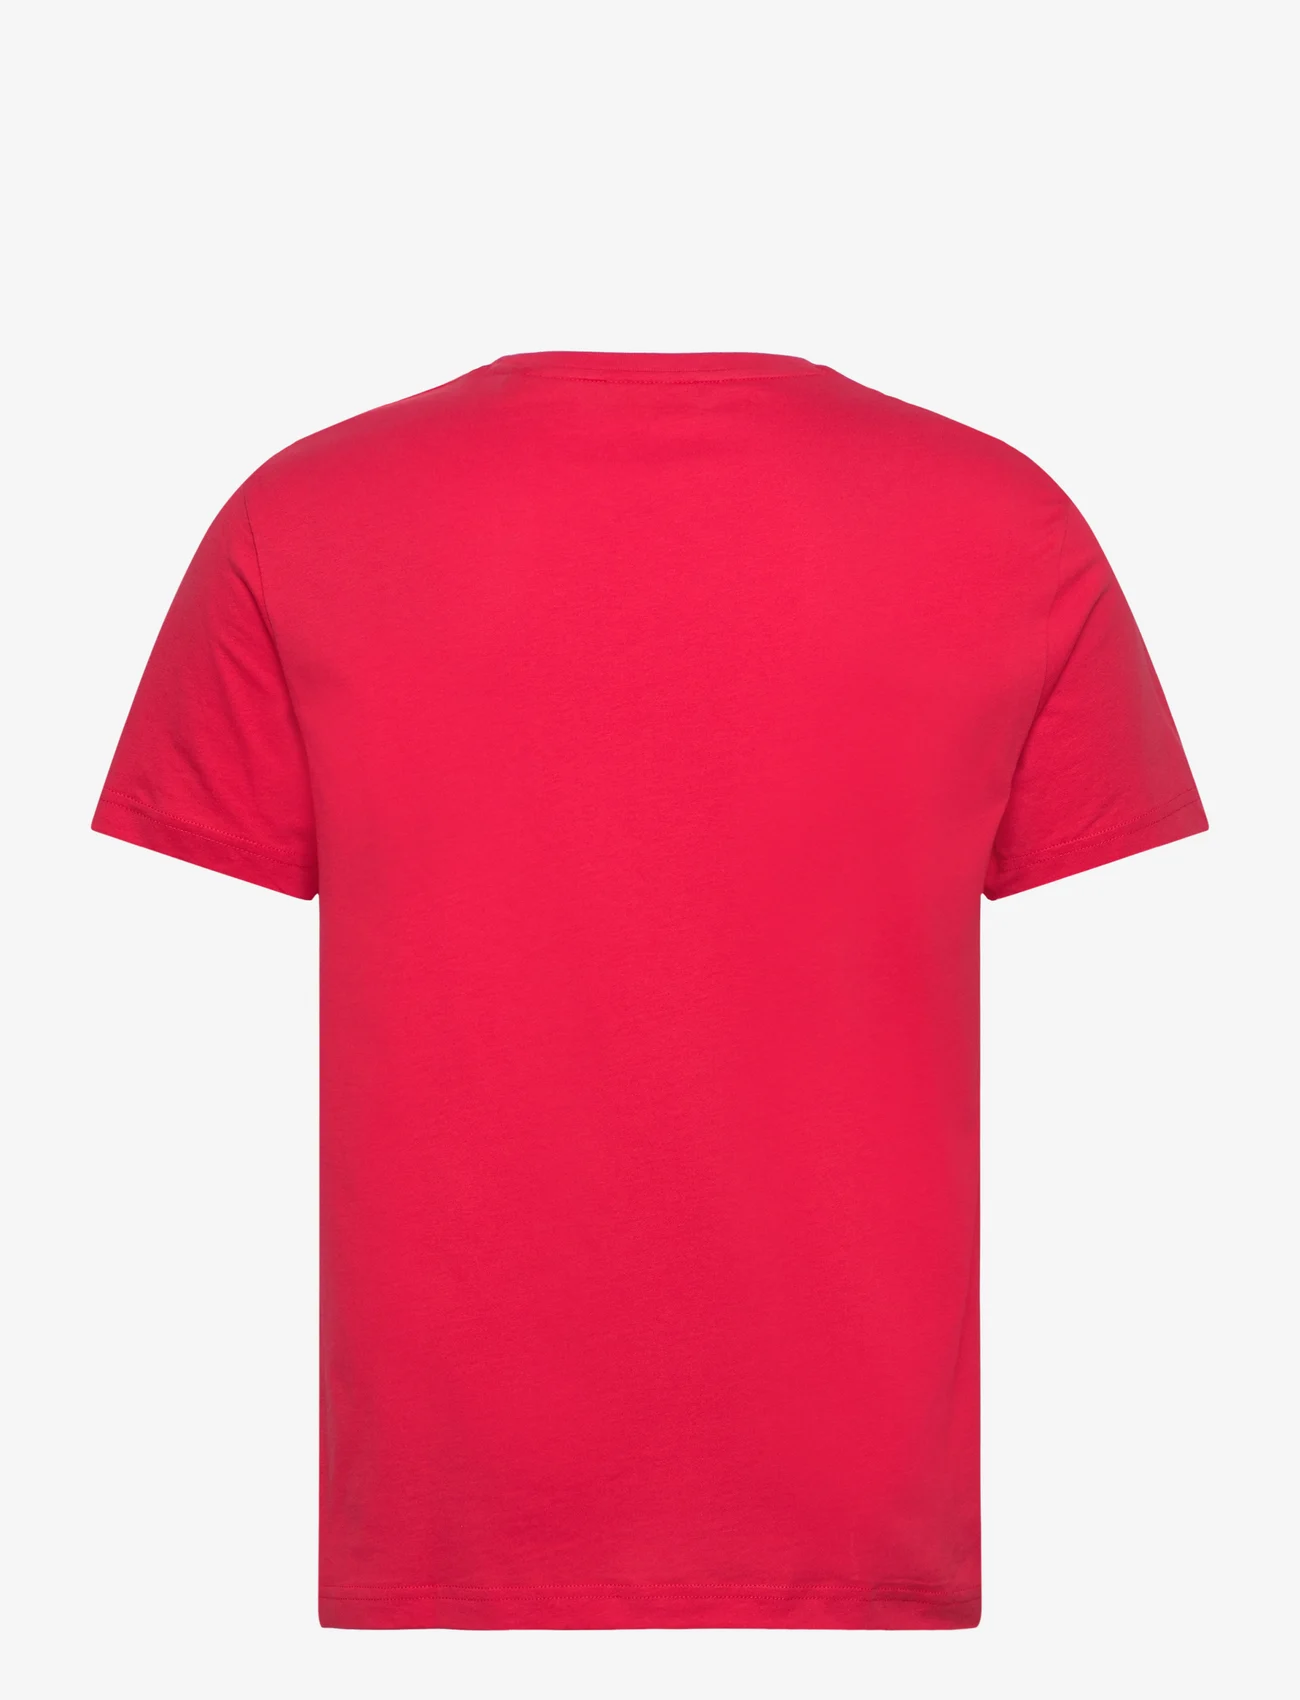 GANT - LOGO SS T-SHIRT - lowest prices - bright red - 1